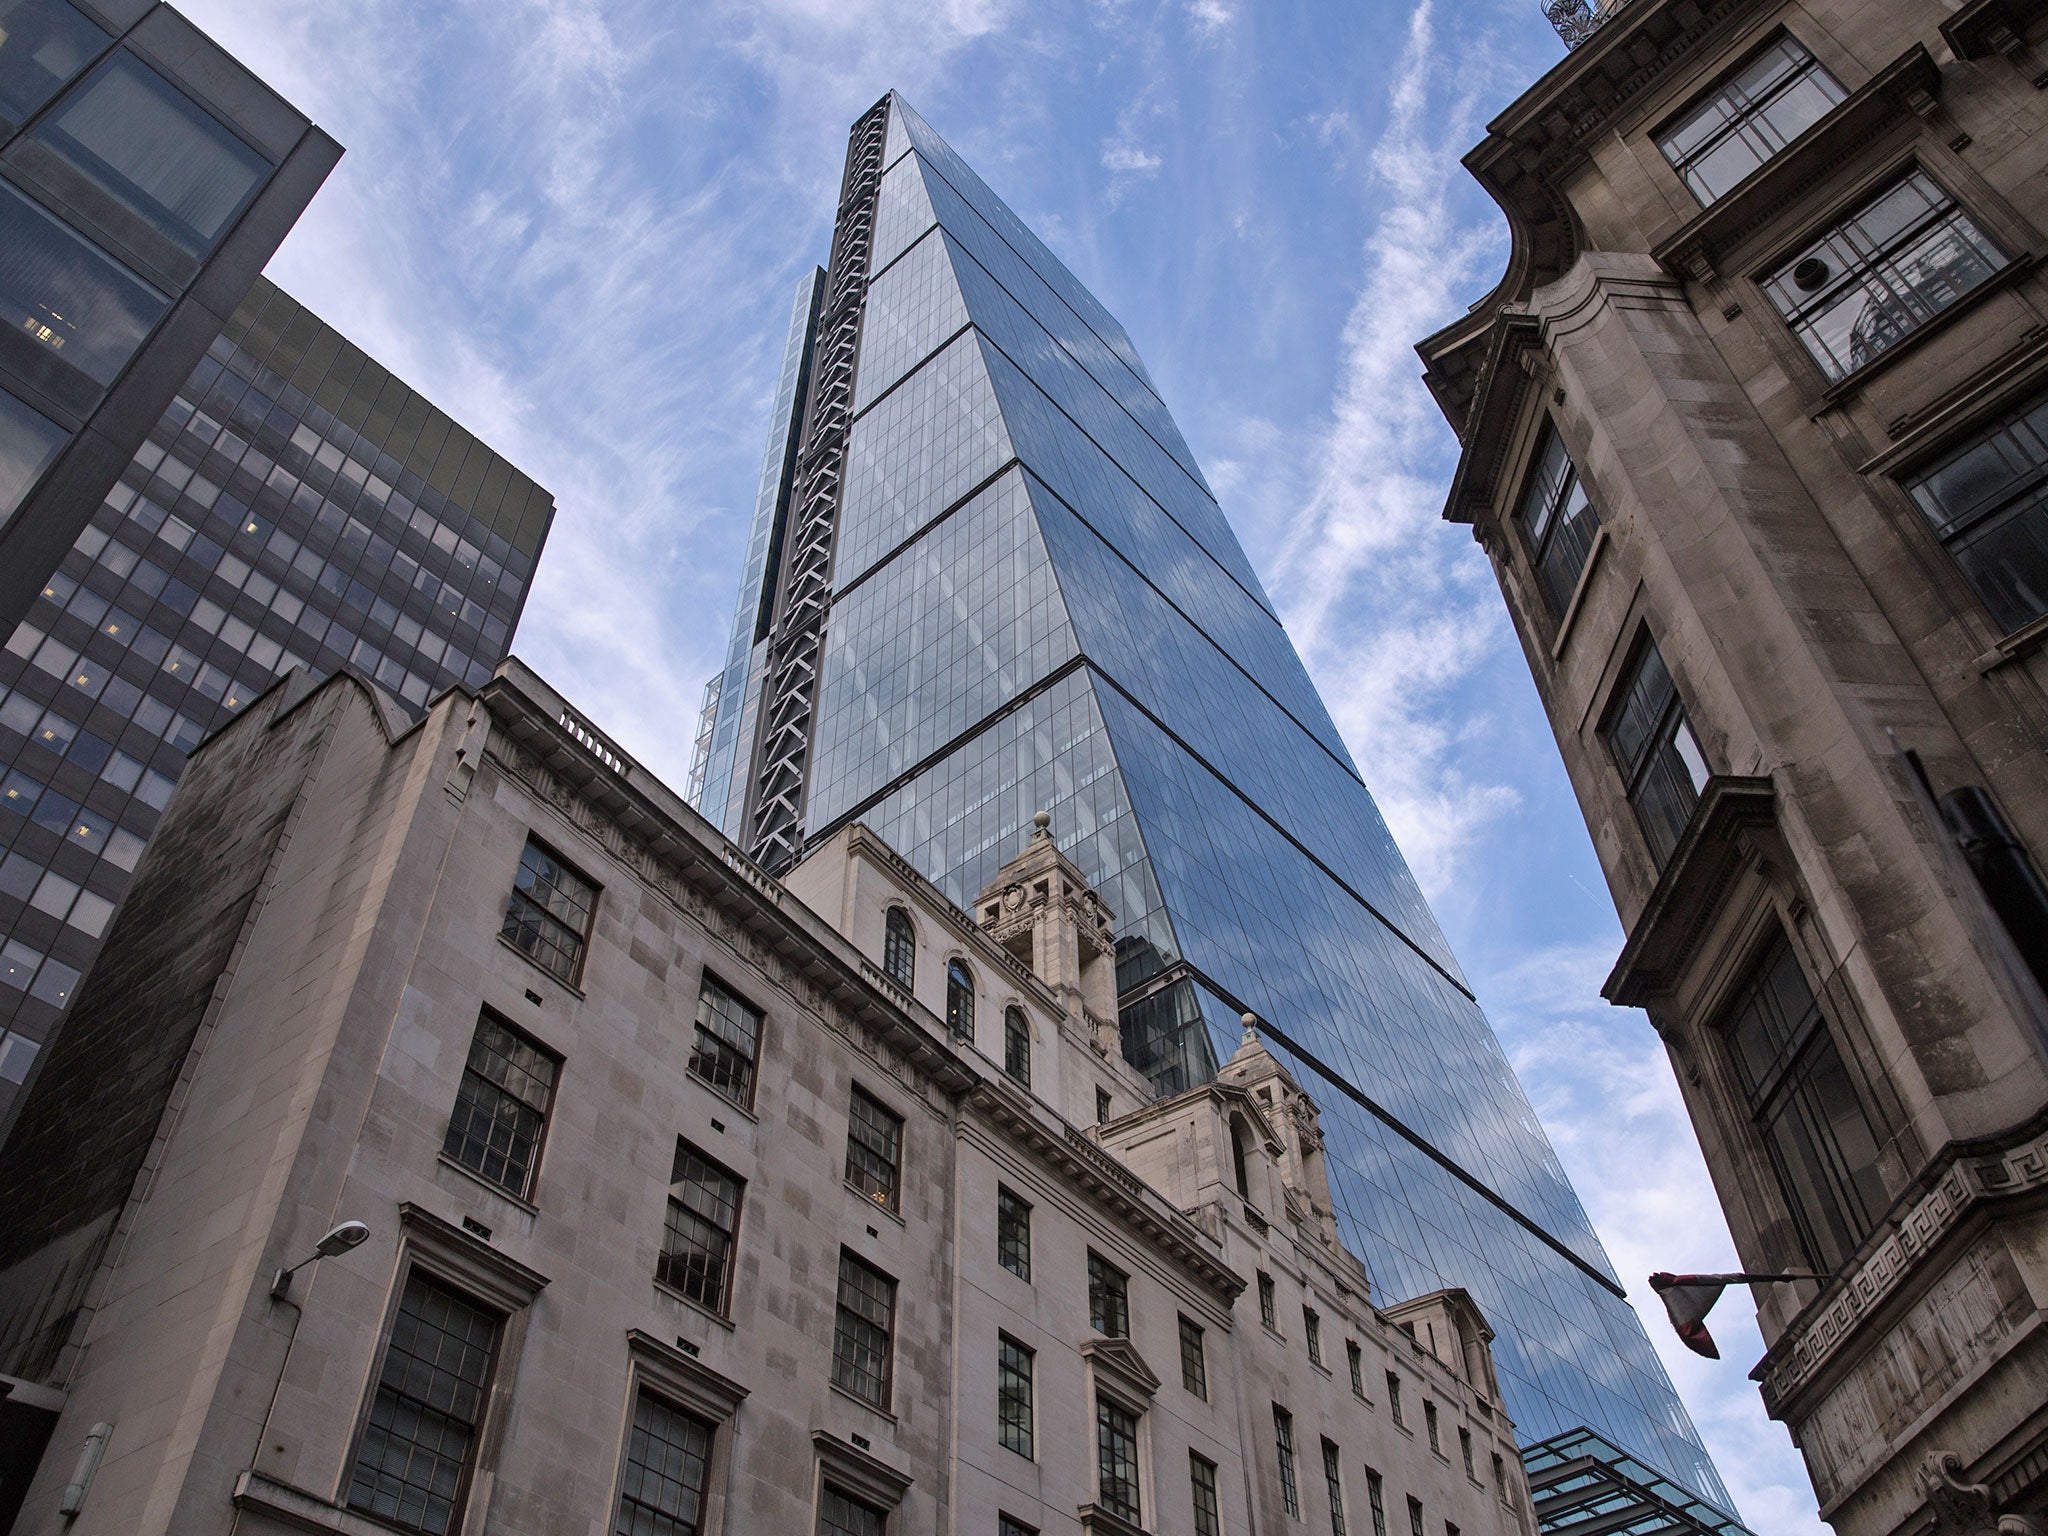 The Leadenhall Building or Cheesegrater